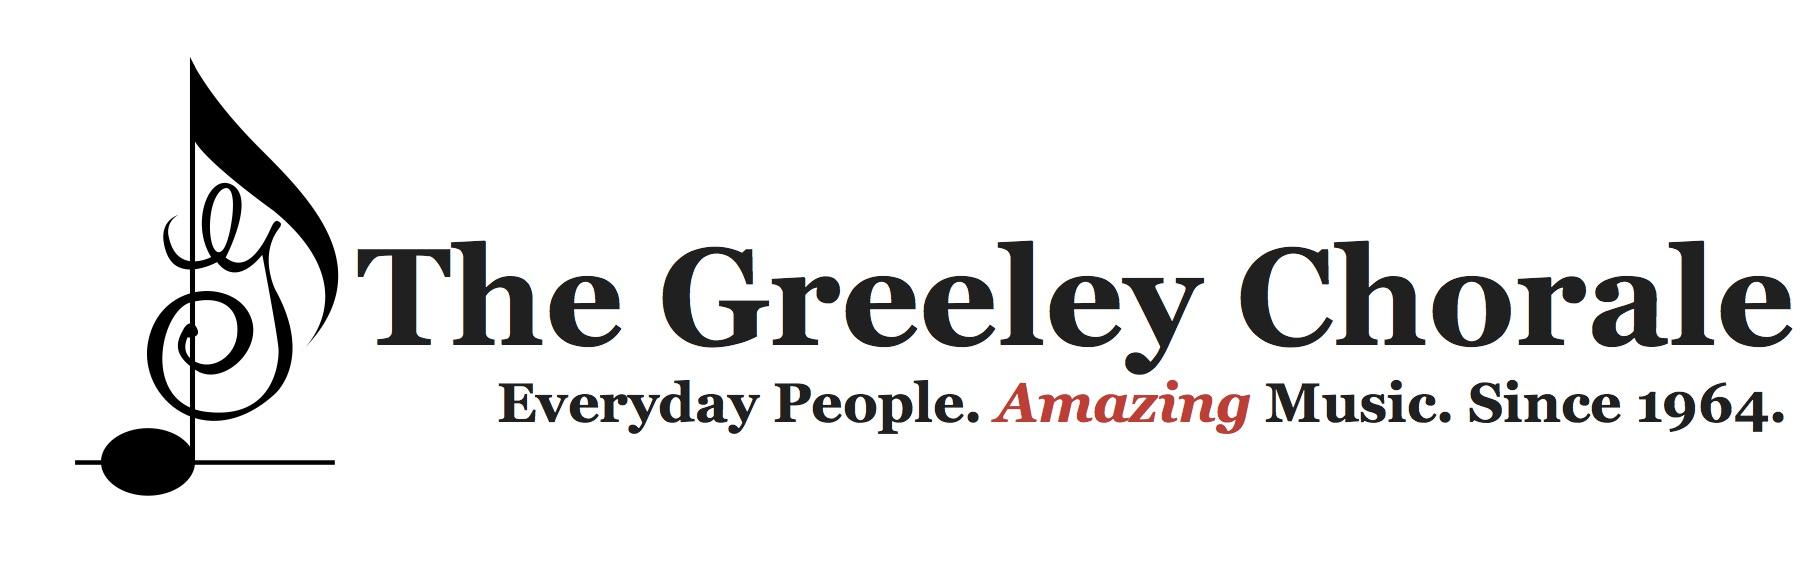 Chorale Logo - The Greeley Chorale | Everyday People. Amazing Music. Since 1964.